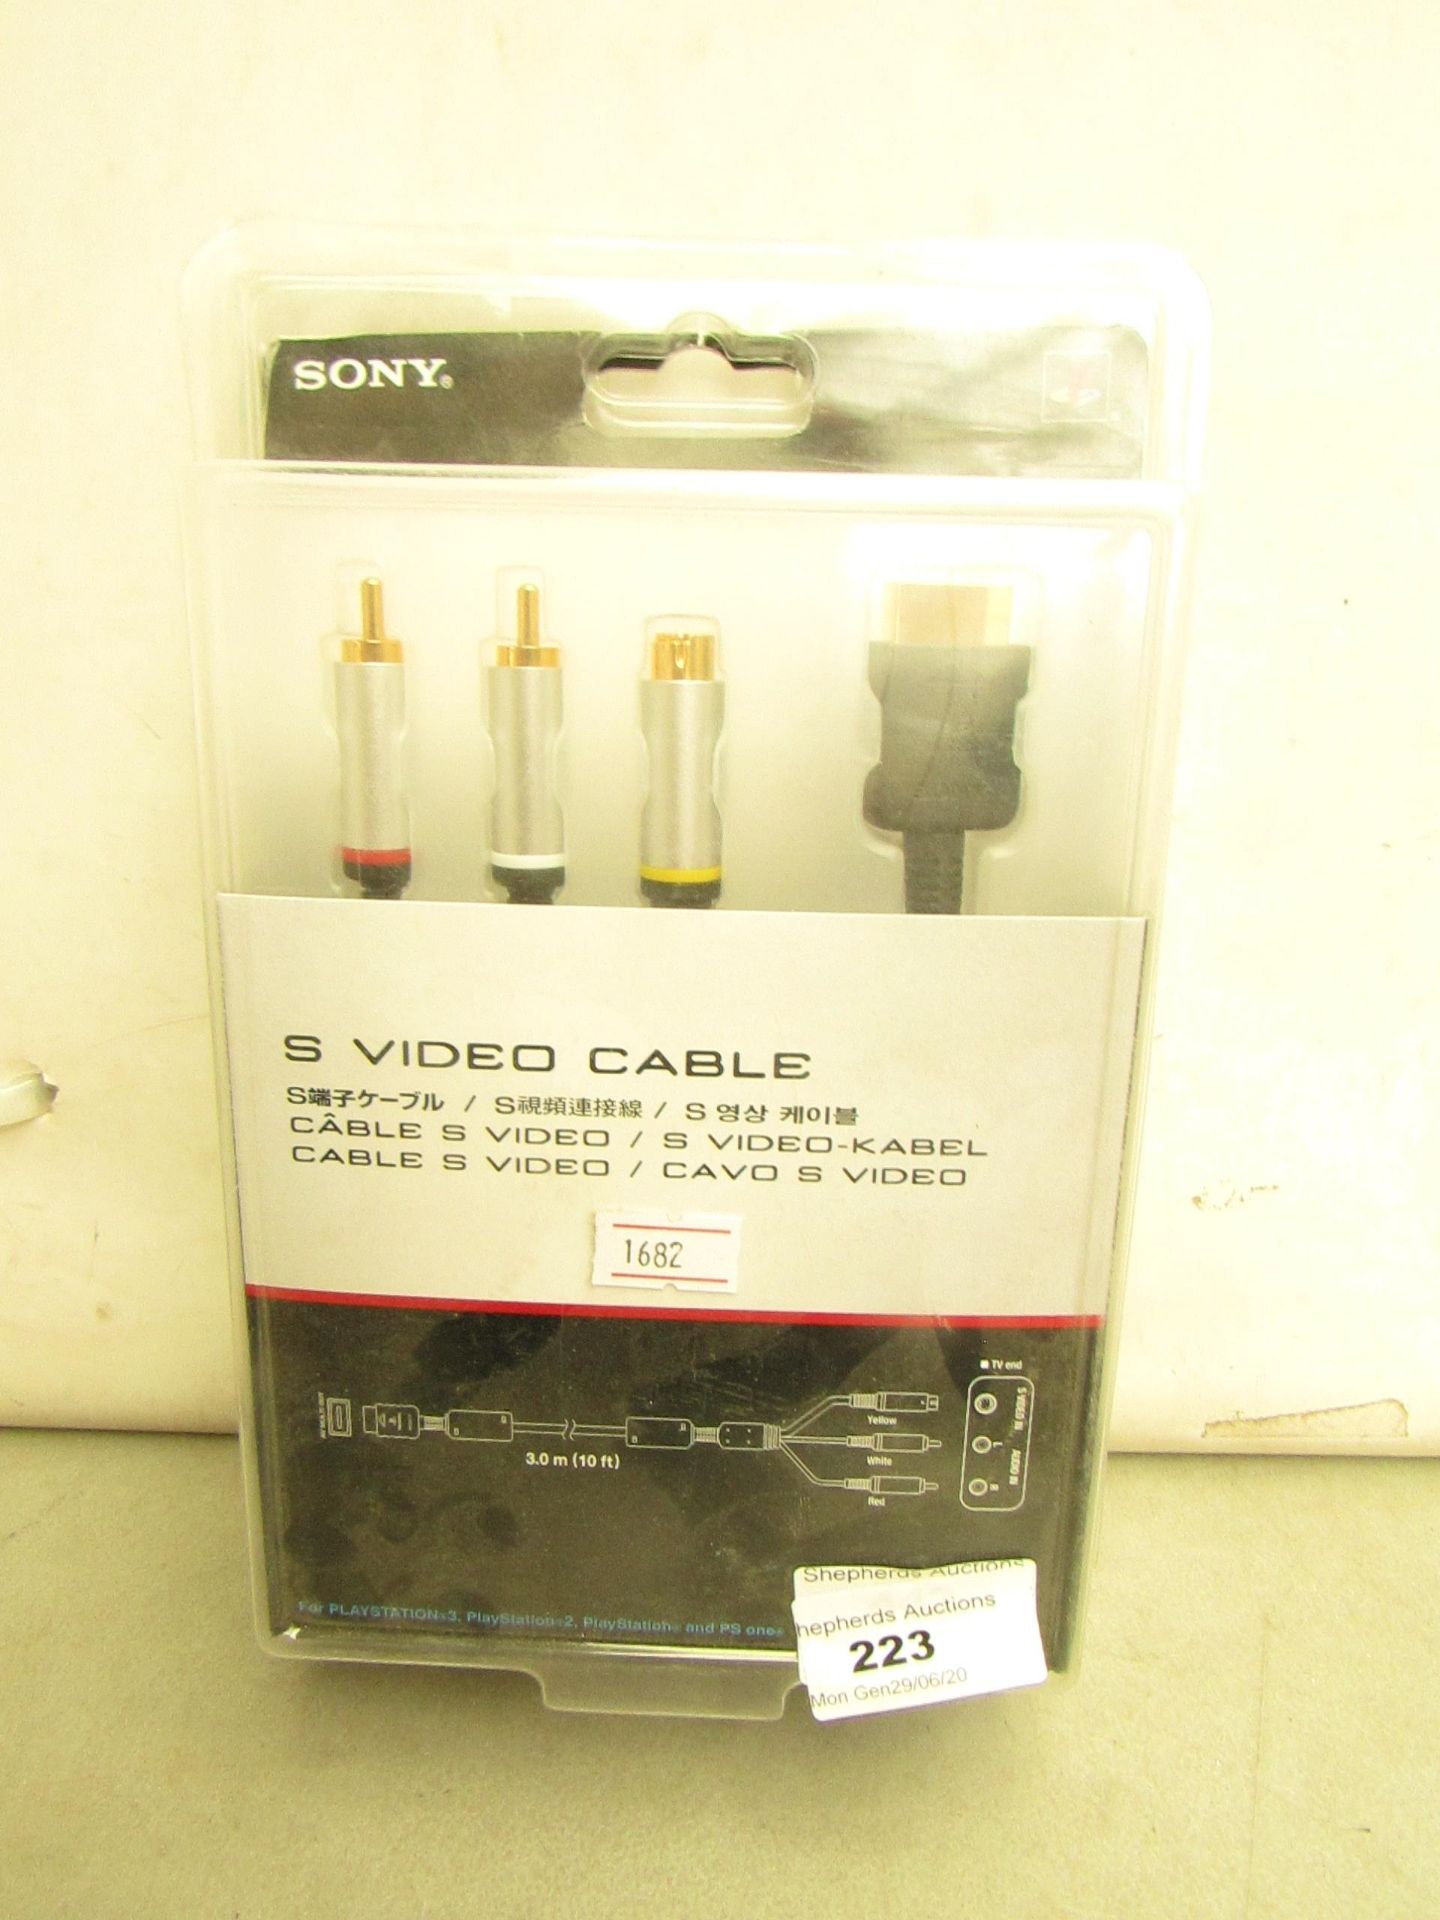 S Video Cable. New & packaged